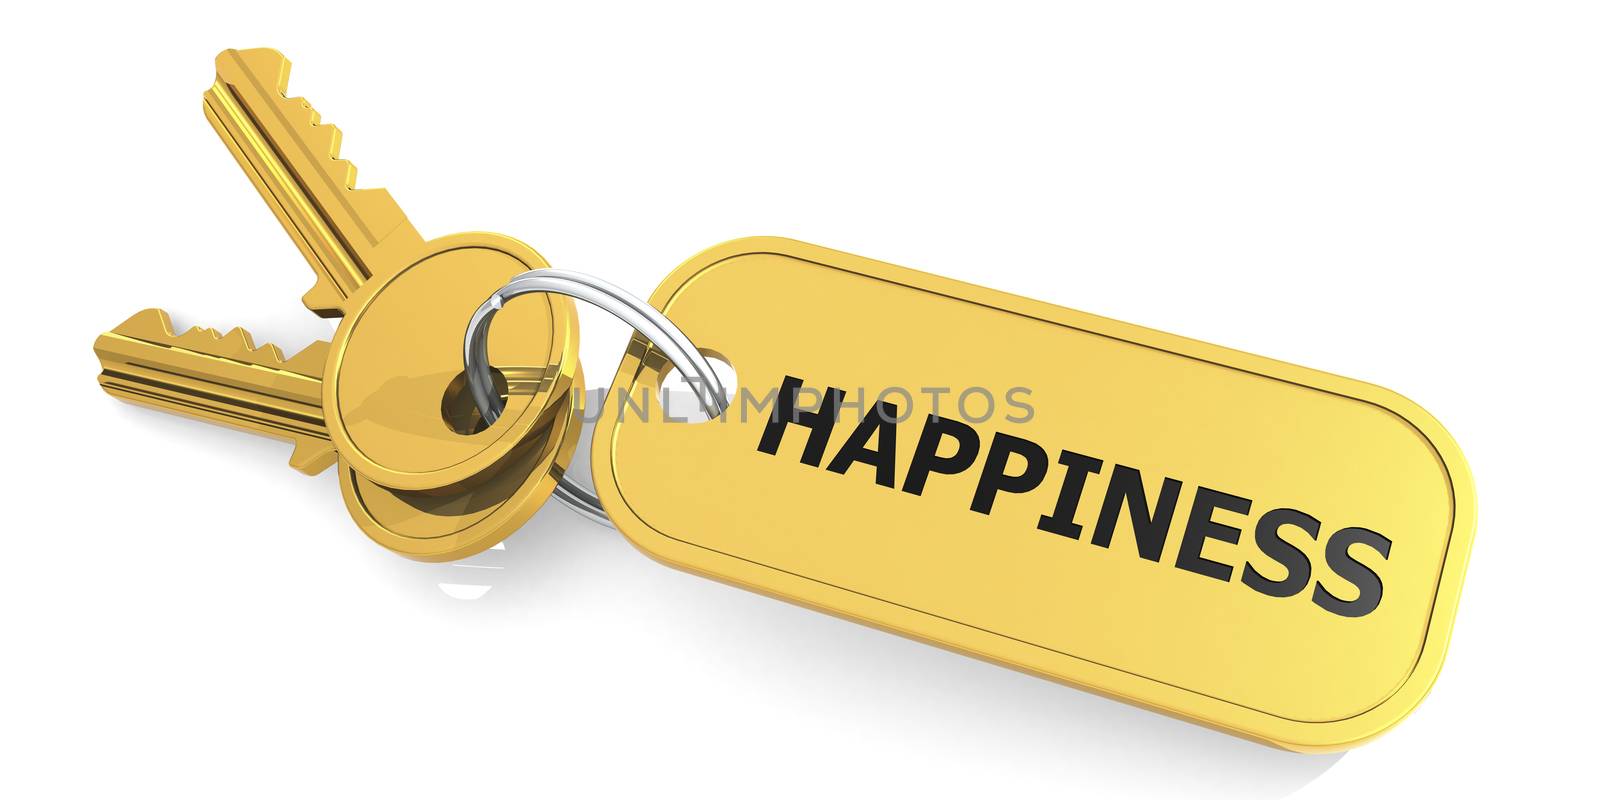 Happiness keys isolated with white background by tang90246